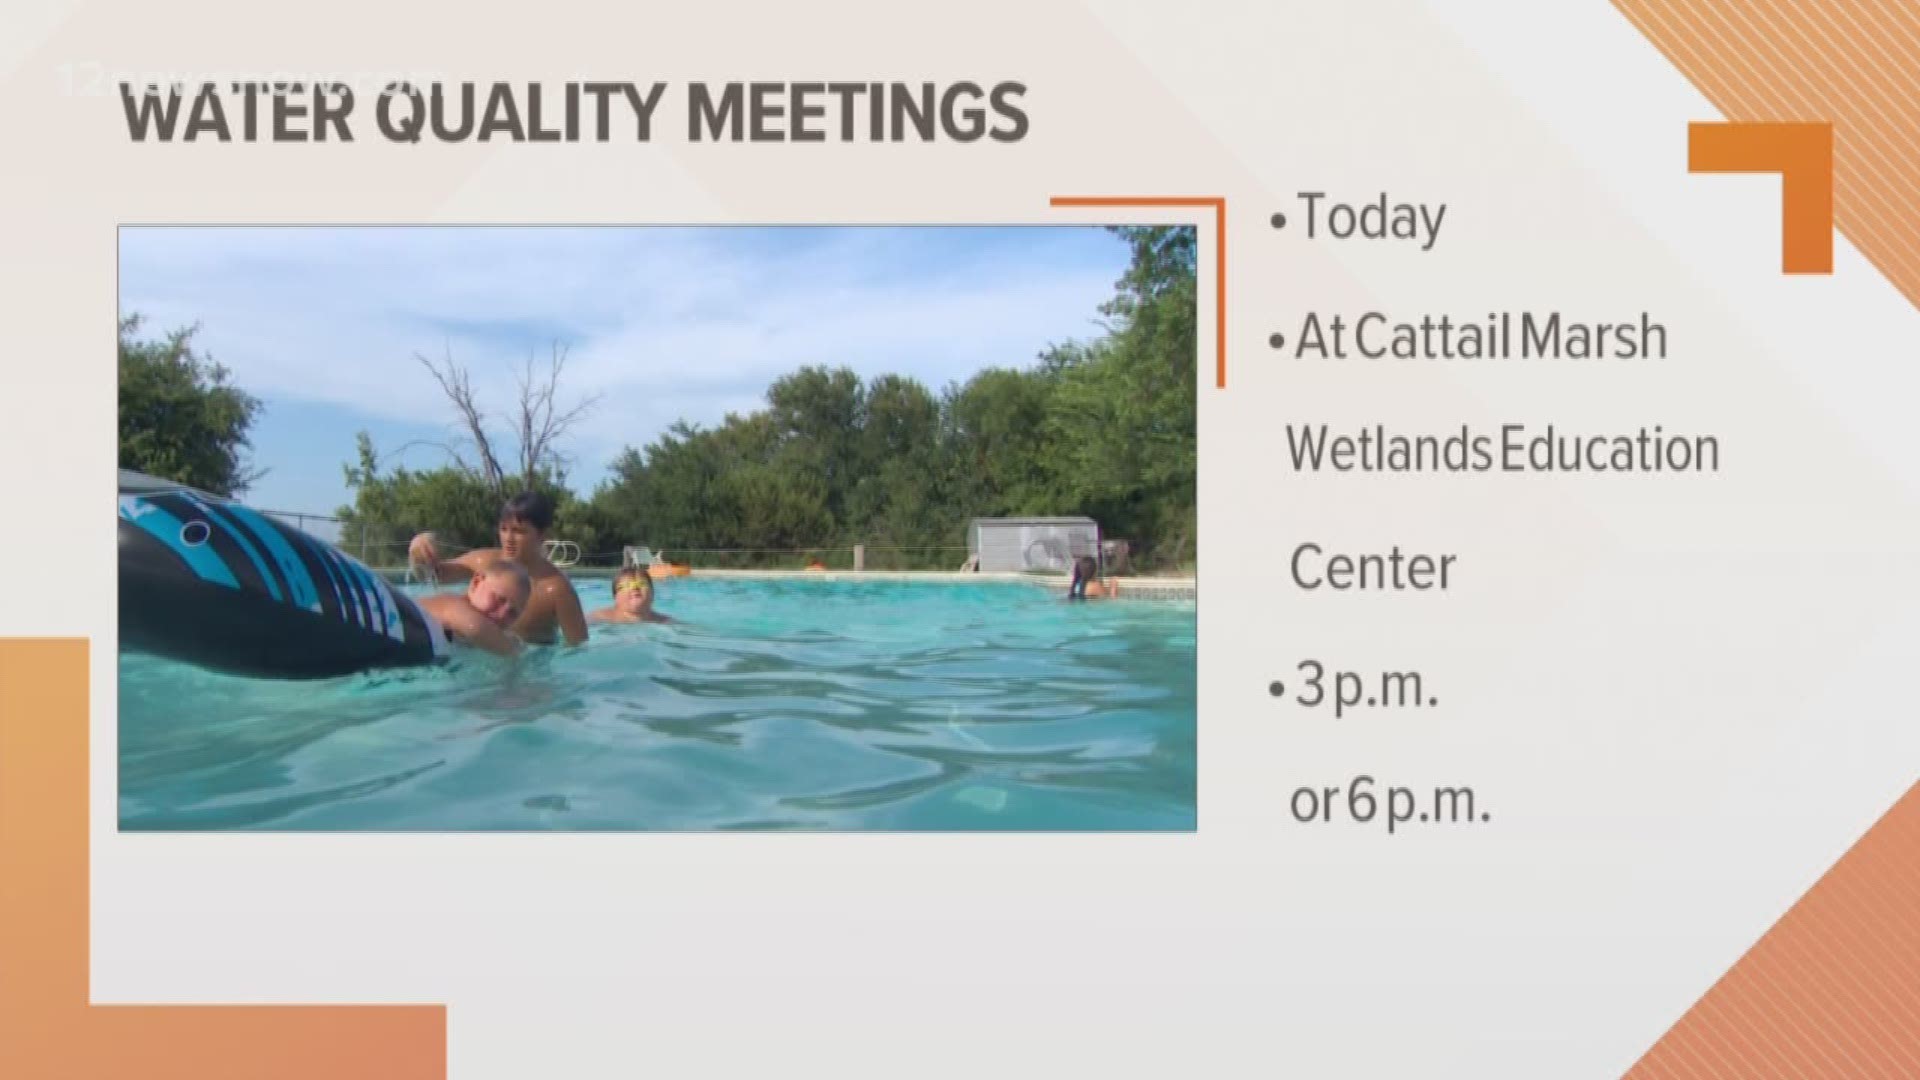 Water quality meetings are set for Thursday at 3 p.m. and 6 p.m.